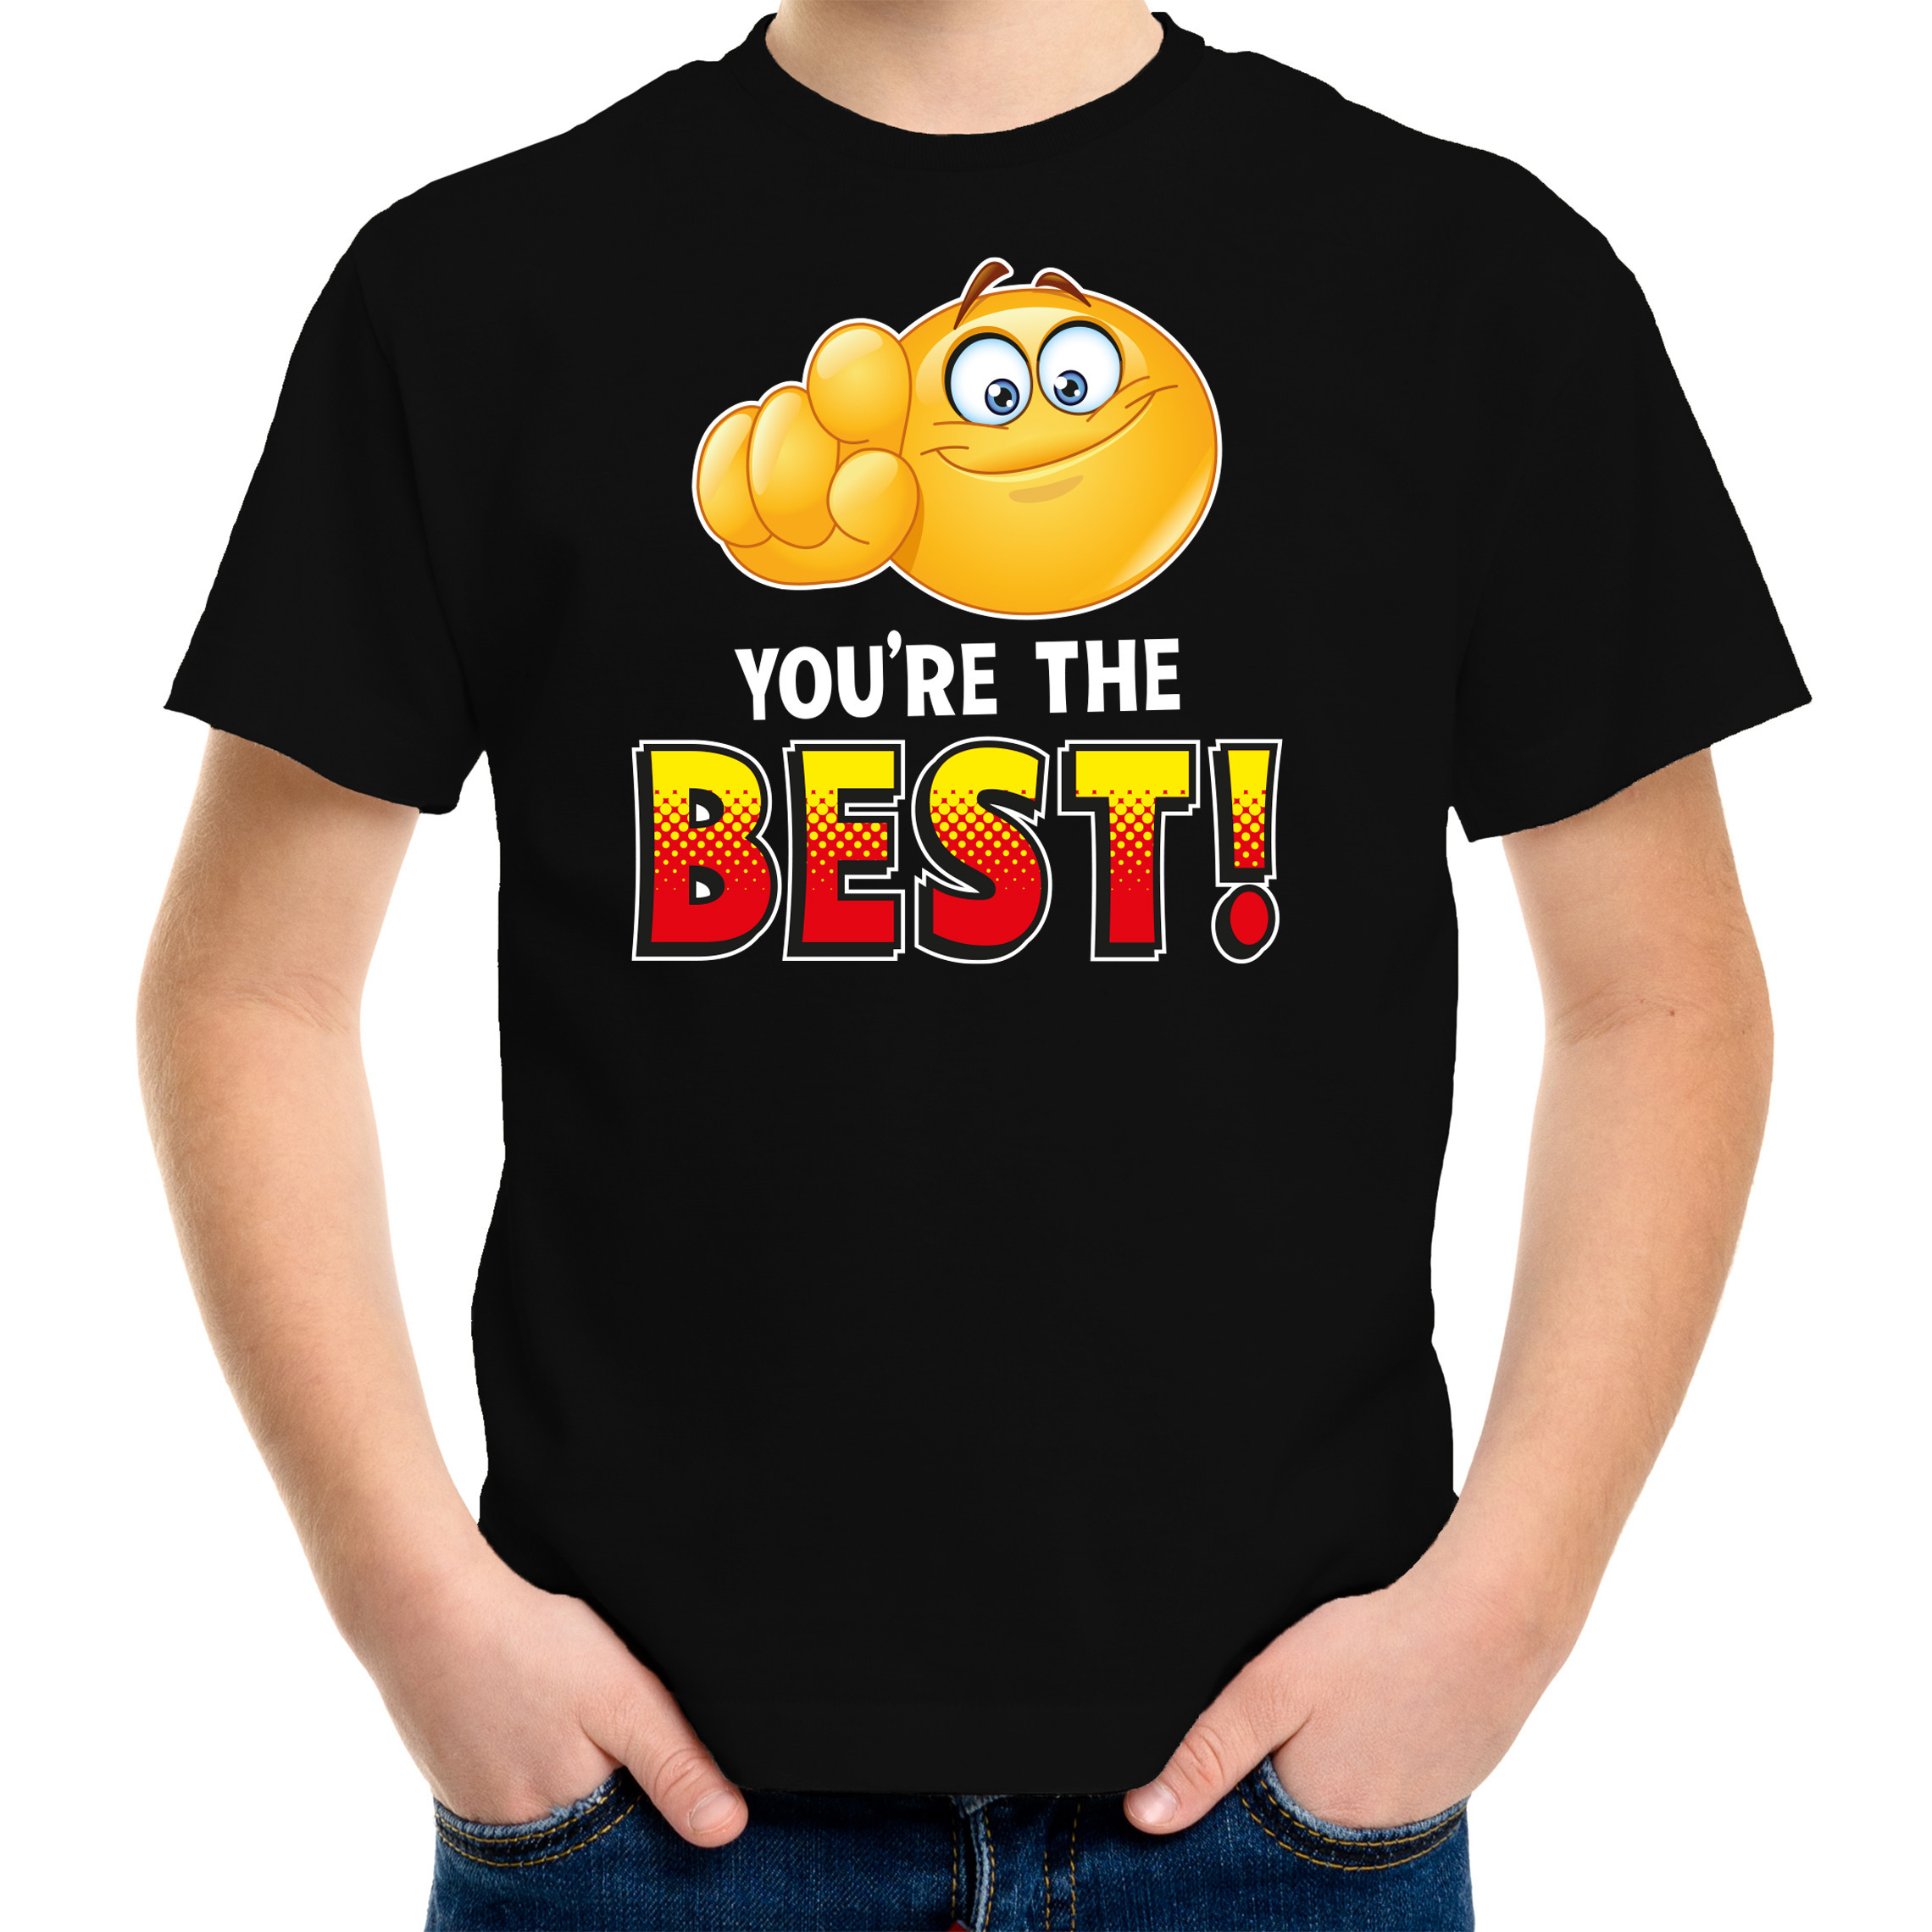 Funny emoticon t-shirt you are the best zwart voor kids